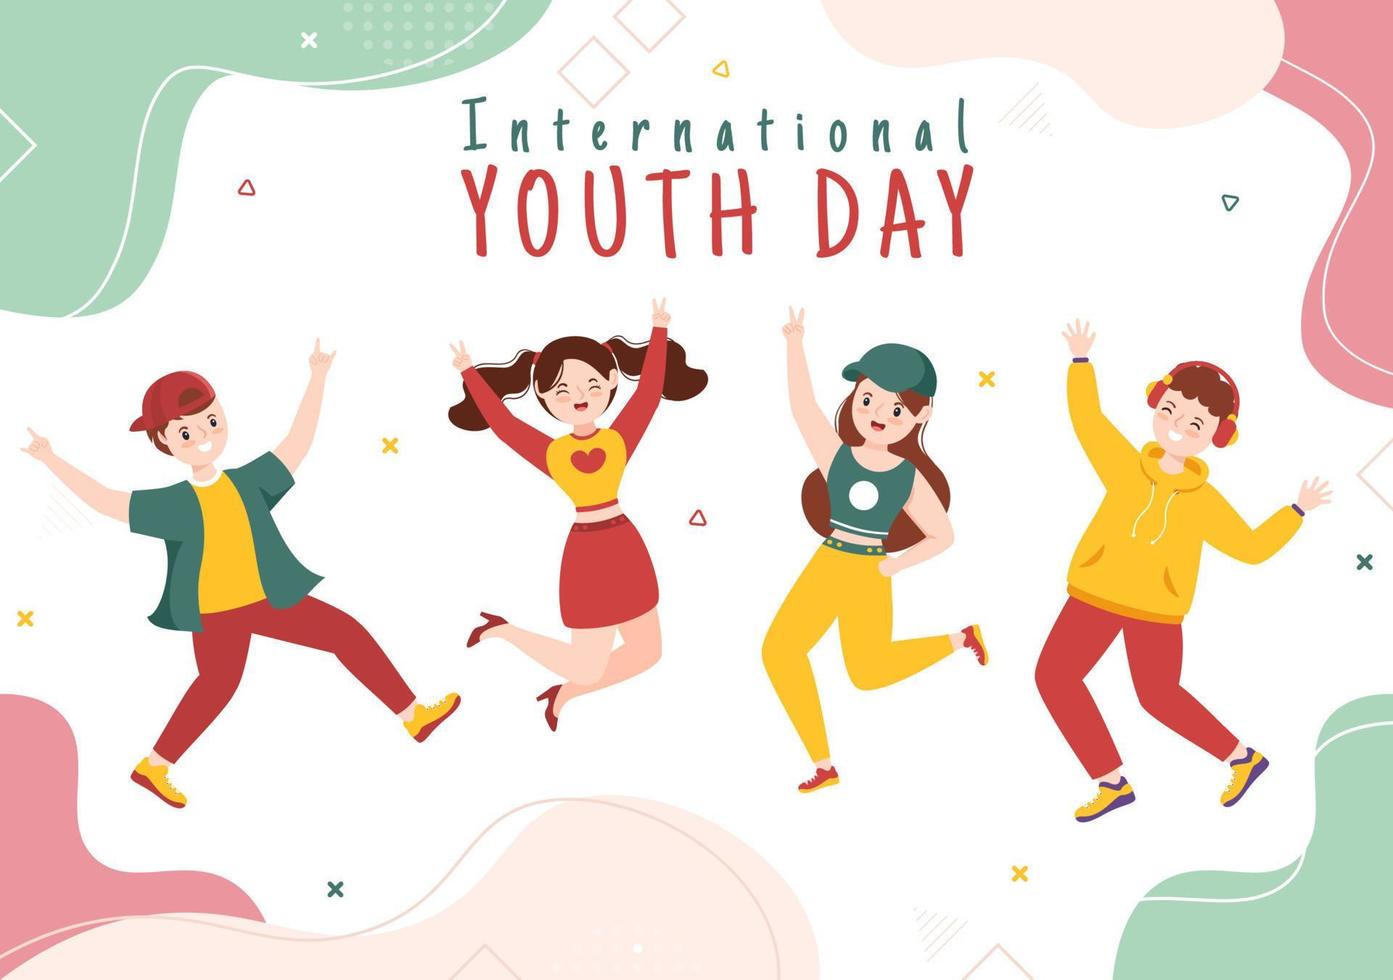 Happy International Youth Day Cute Cartoon Illustration with Young Boys and Girls For Campaign in Flat Style Background vector